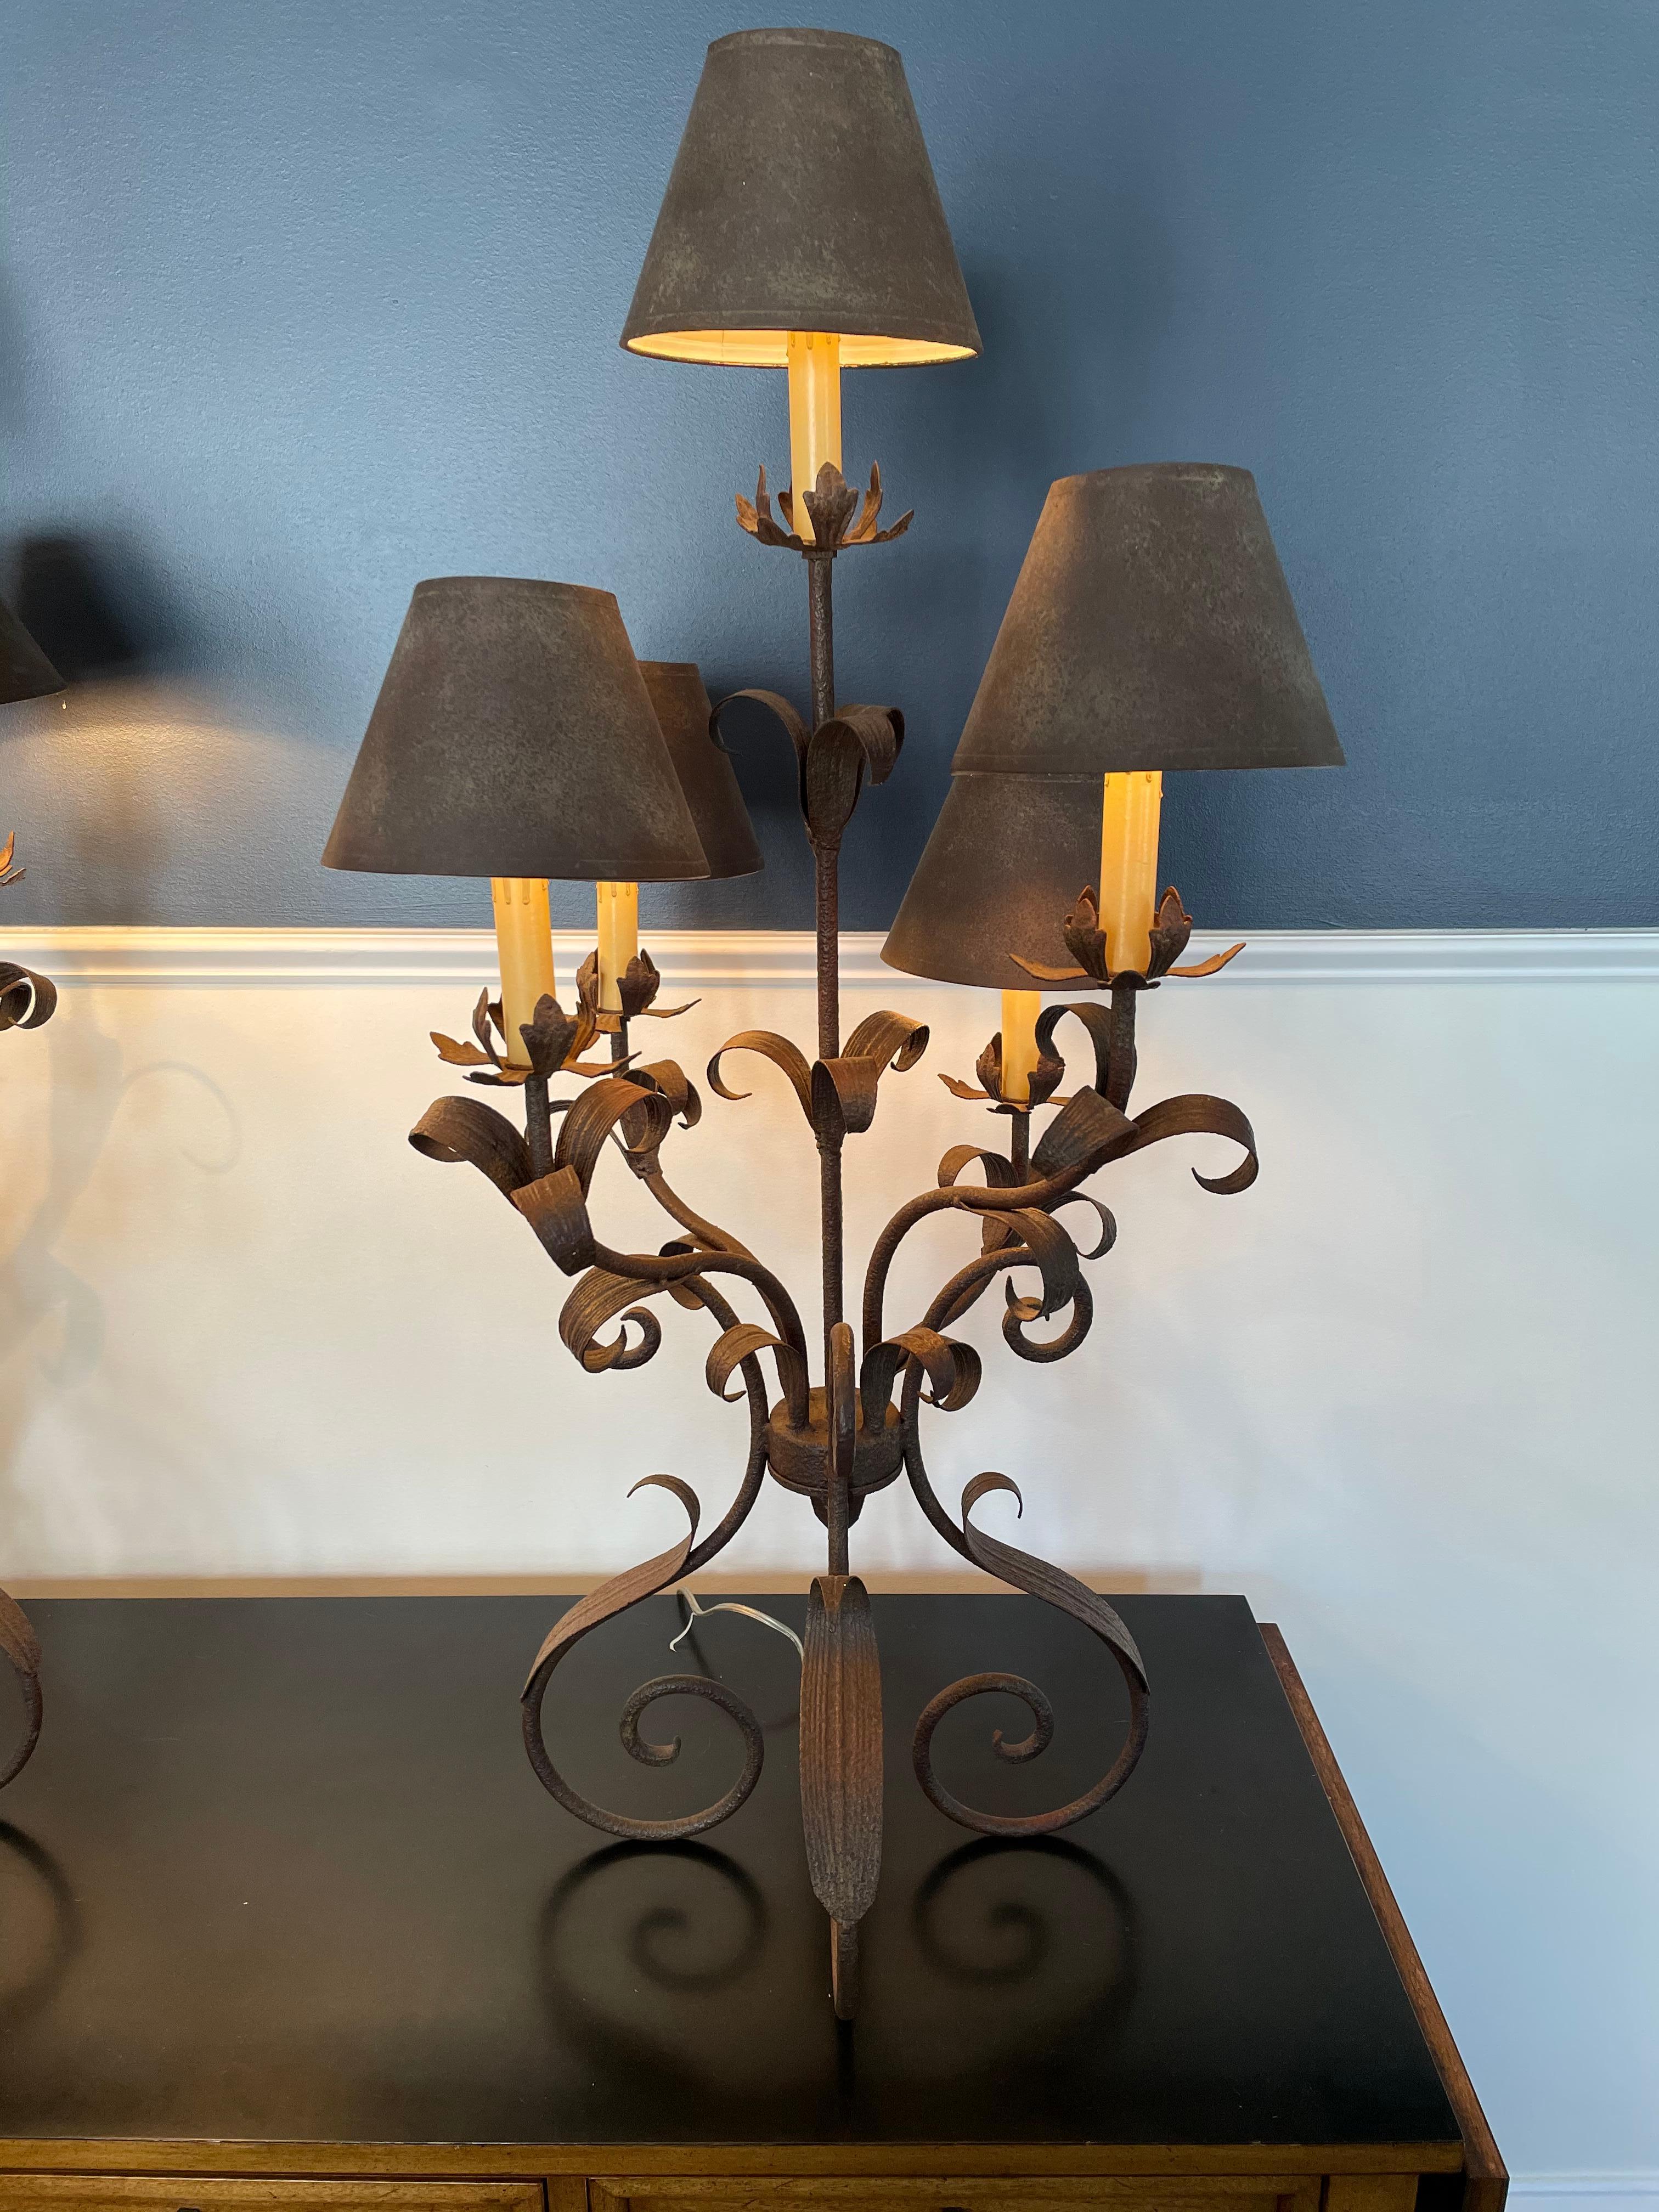 Beautiful candelabra buffet lamps with toleware leaf design each with 5 bulbs. Elegant and dramatic presence. From the estate of Beetle Bailey creator, Mort Walker.